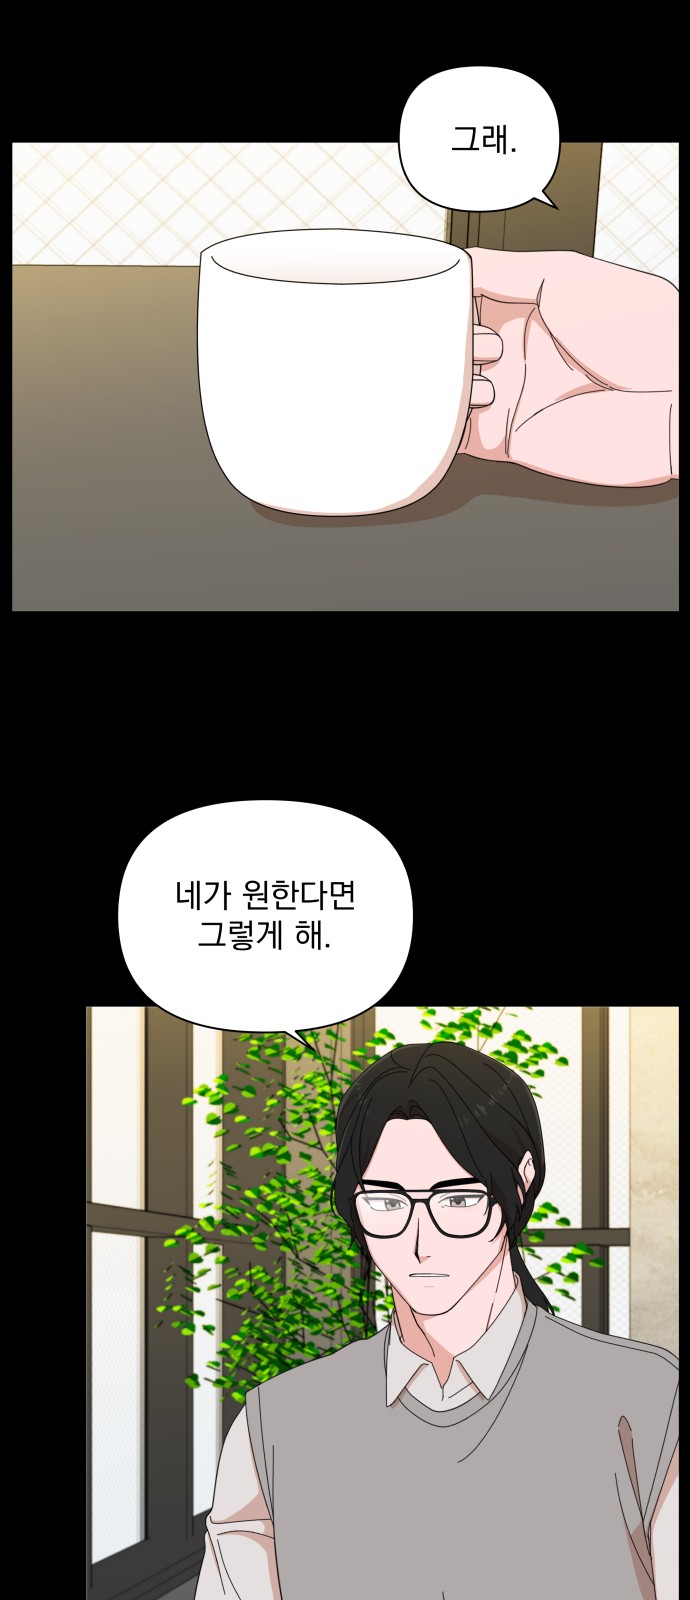 The Man With Pretty Lips - Chapter 8 - Page 3